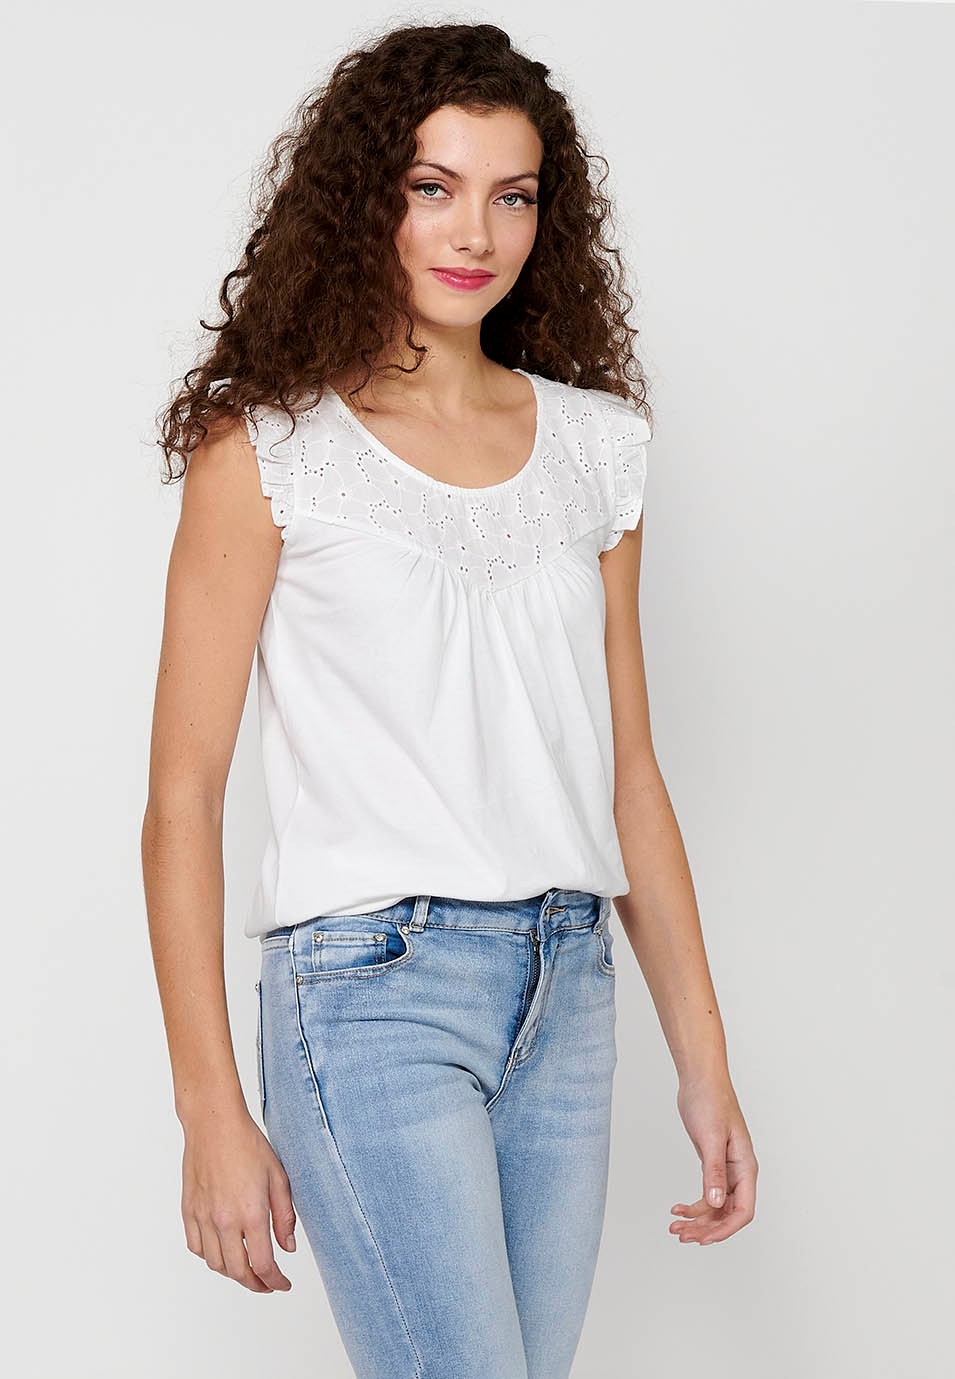 Women's White Round Neck Short Sleeve T-shirt with Ruffle on the Shoulders